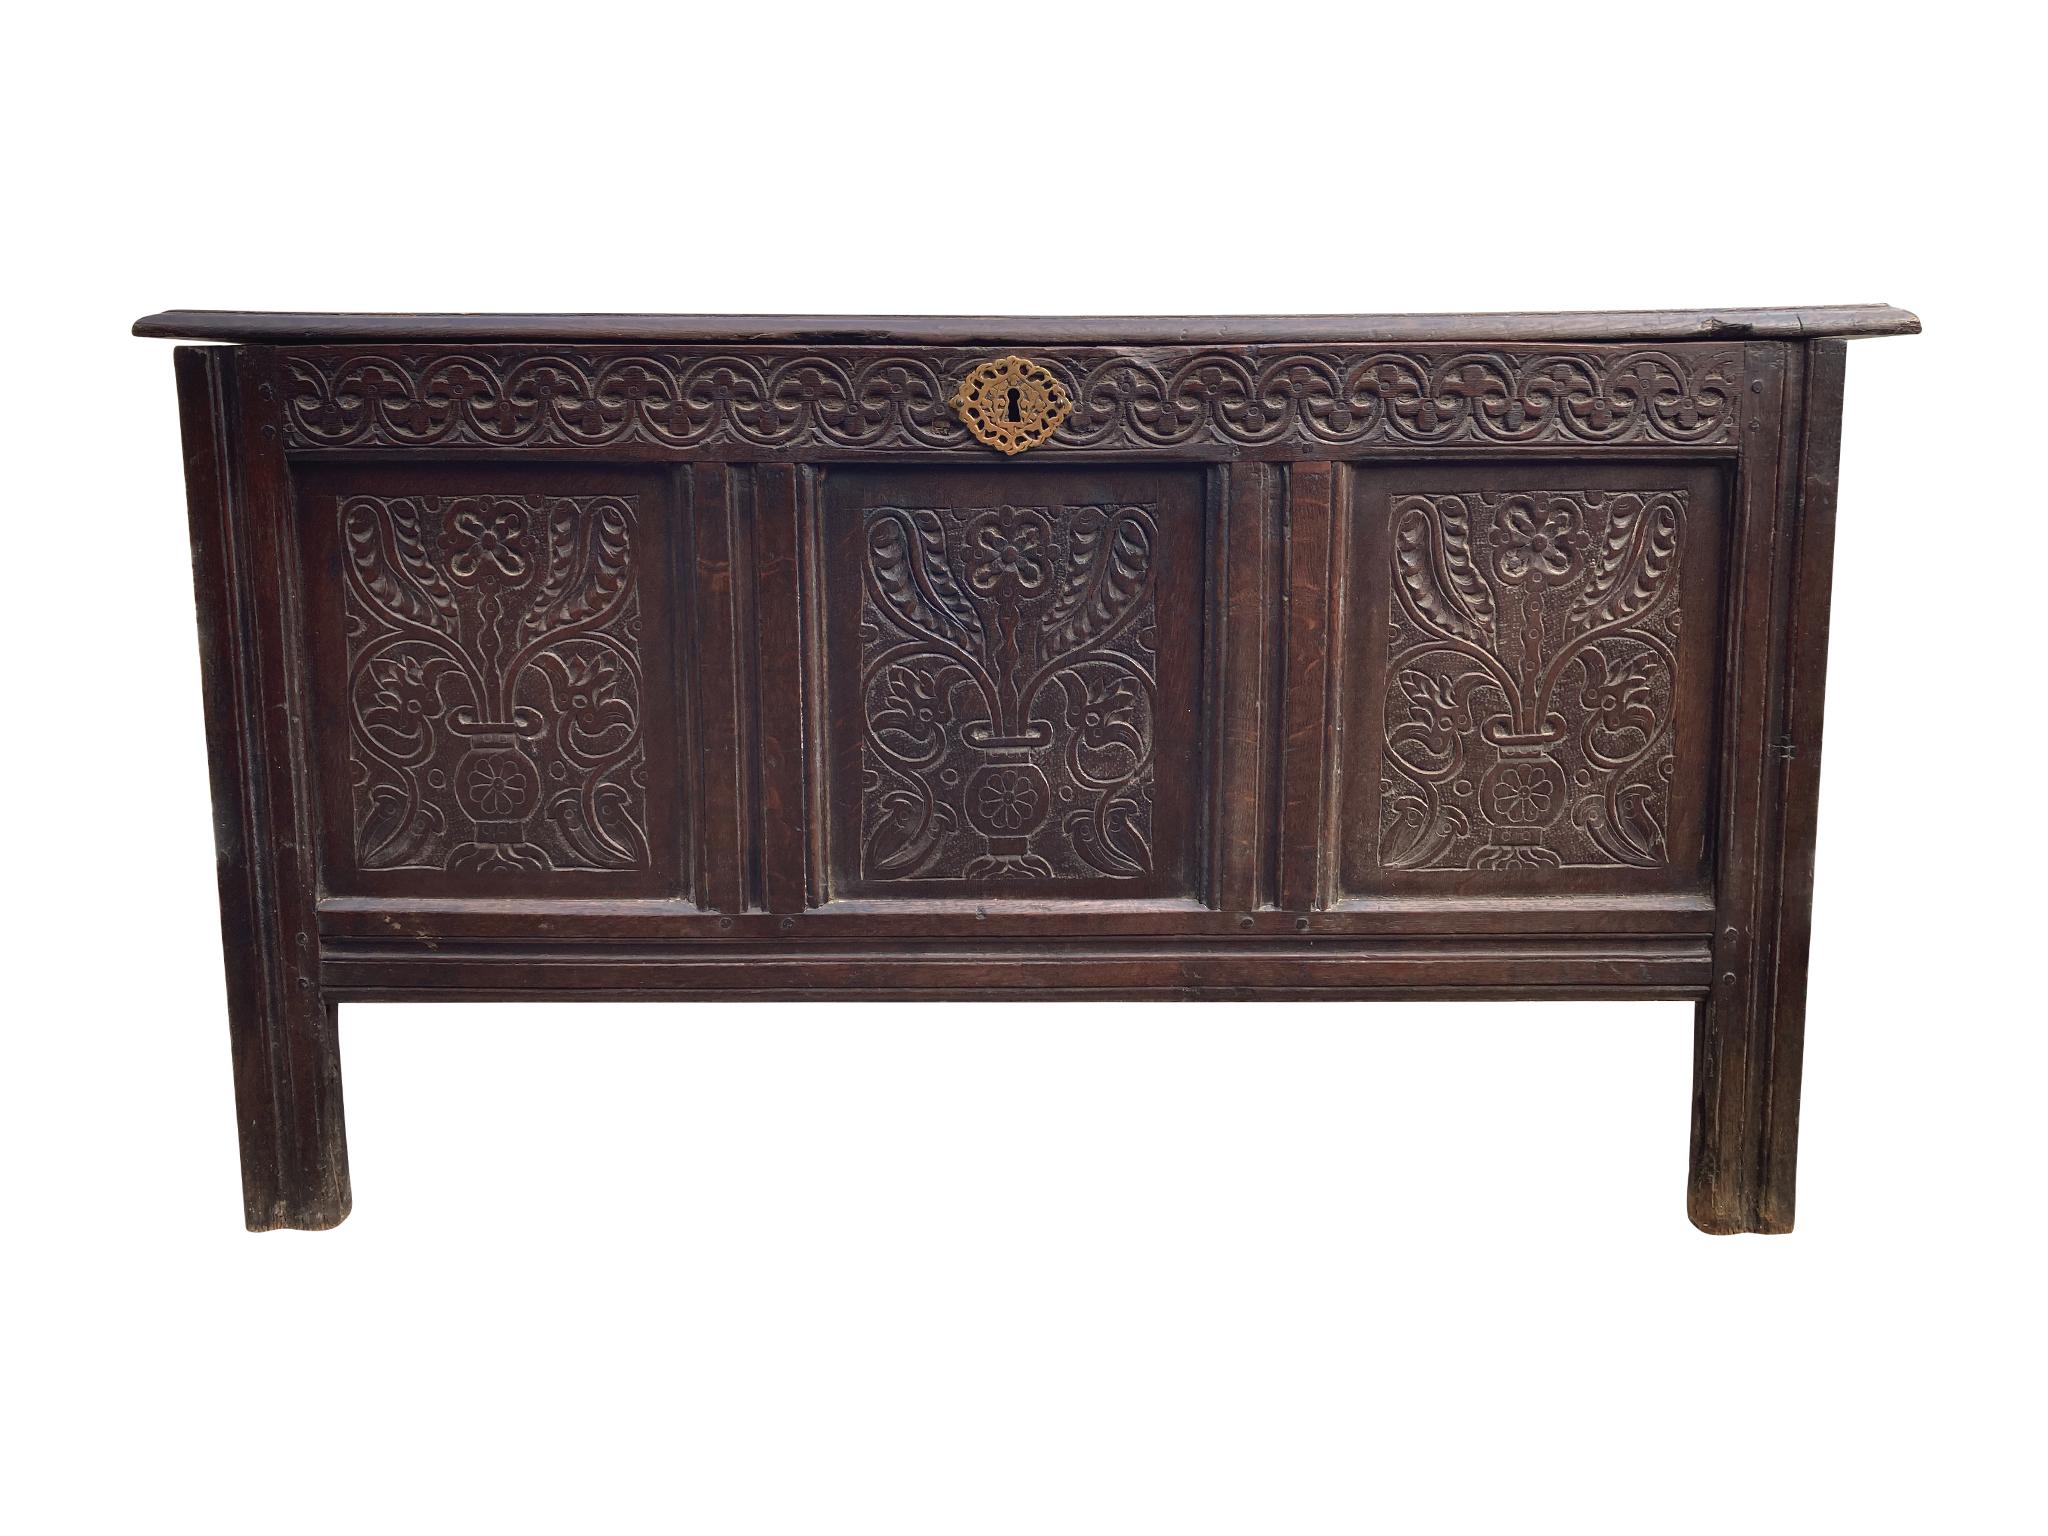 Hand-Crafted Late 17th Century English Oak Blanket Chest